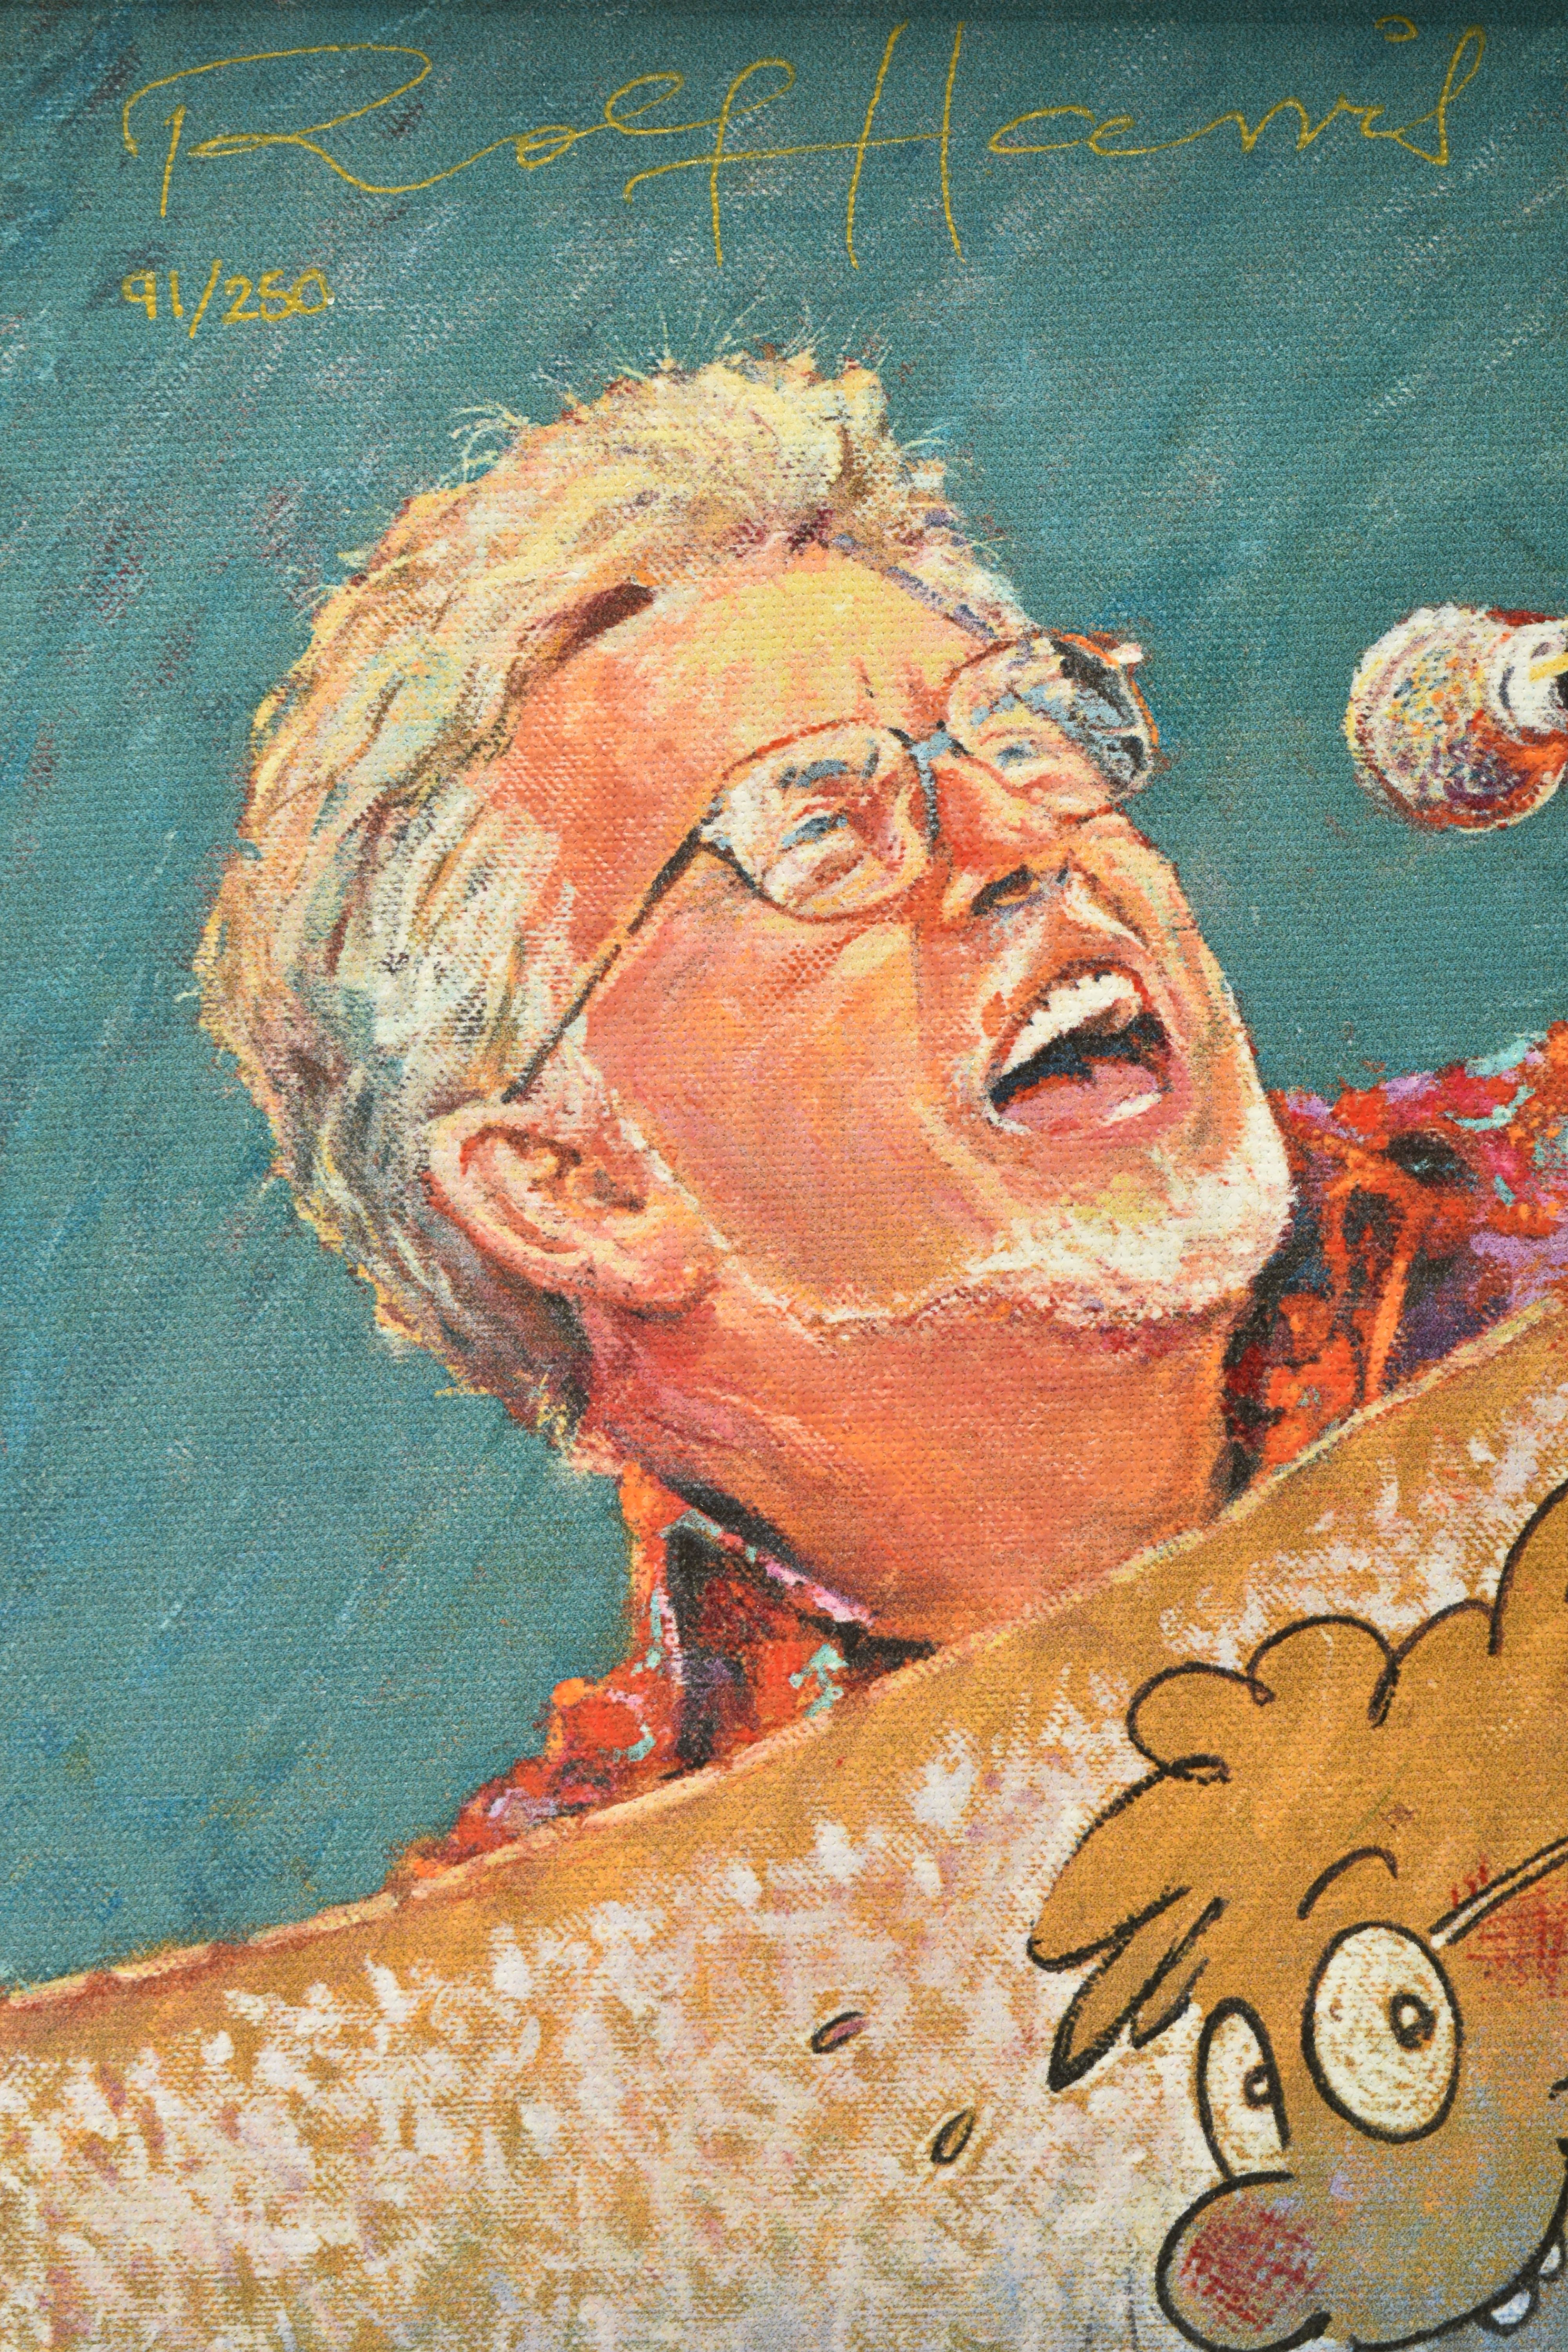 ROLF HARRIS (AUSTRALIA 1930-2023) 'ROLF SINGS', a signed limited edition print on canvas board, - Image 3 of 6